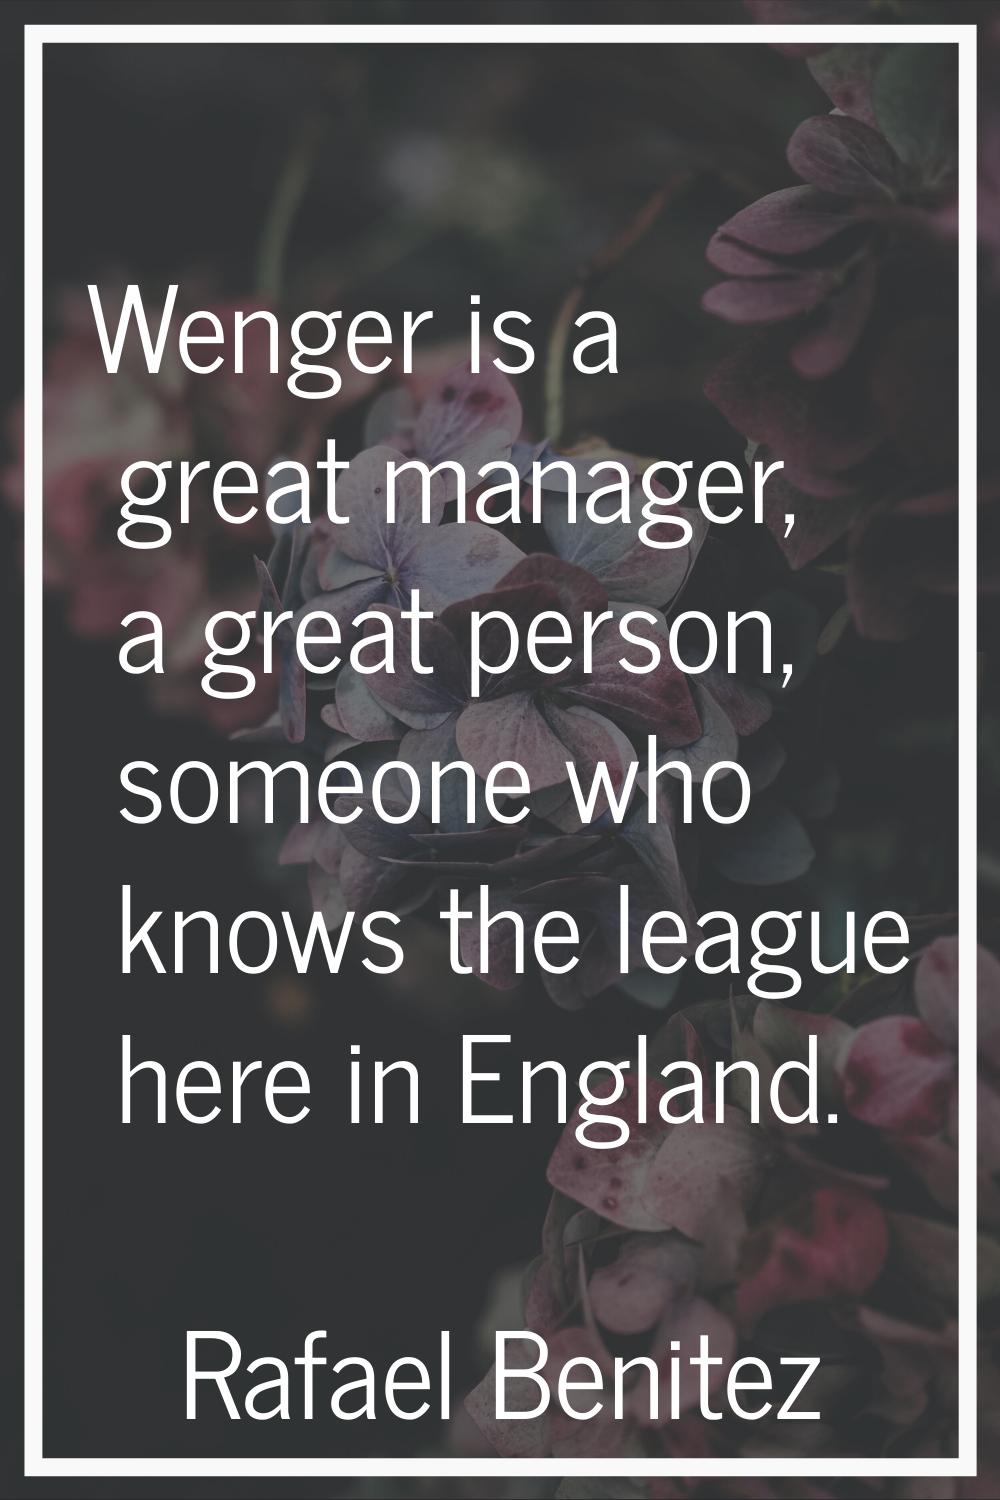 Wenger is a great manager, a great person, someone who knows the league here in England.